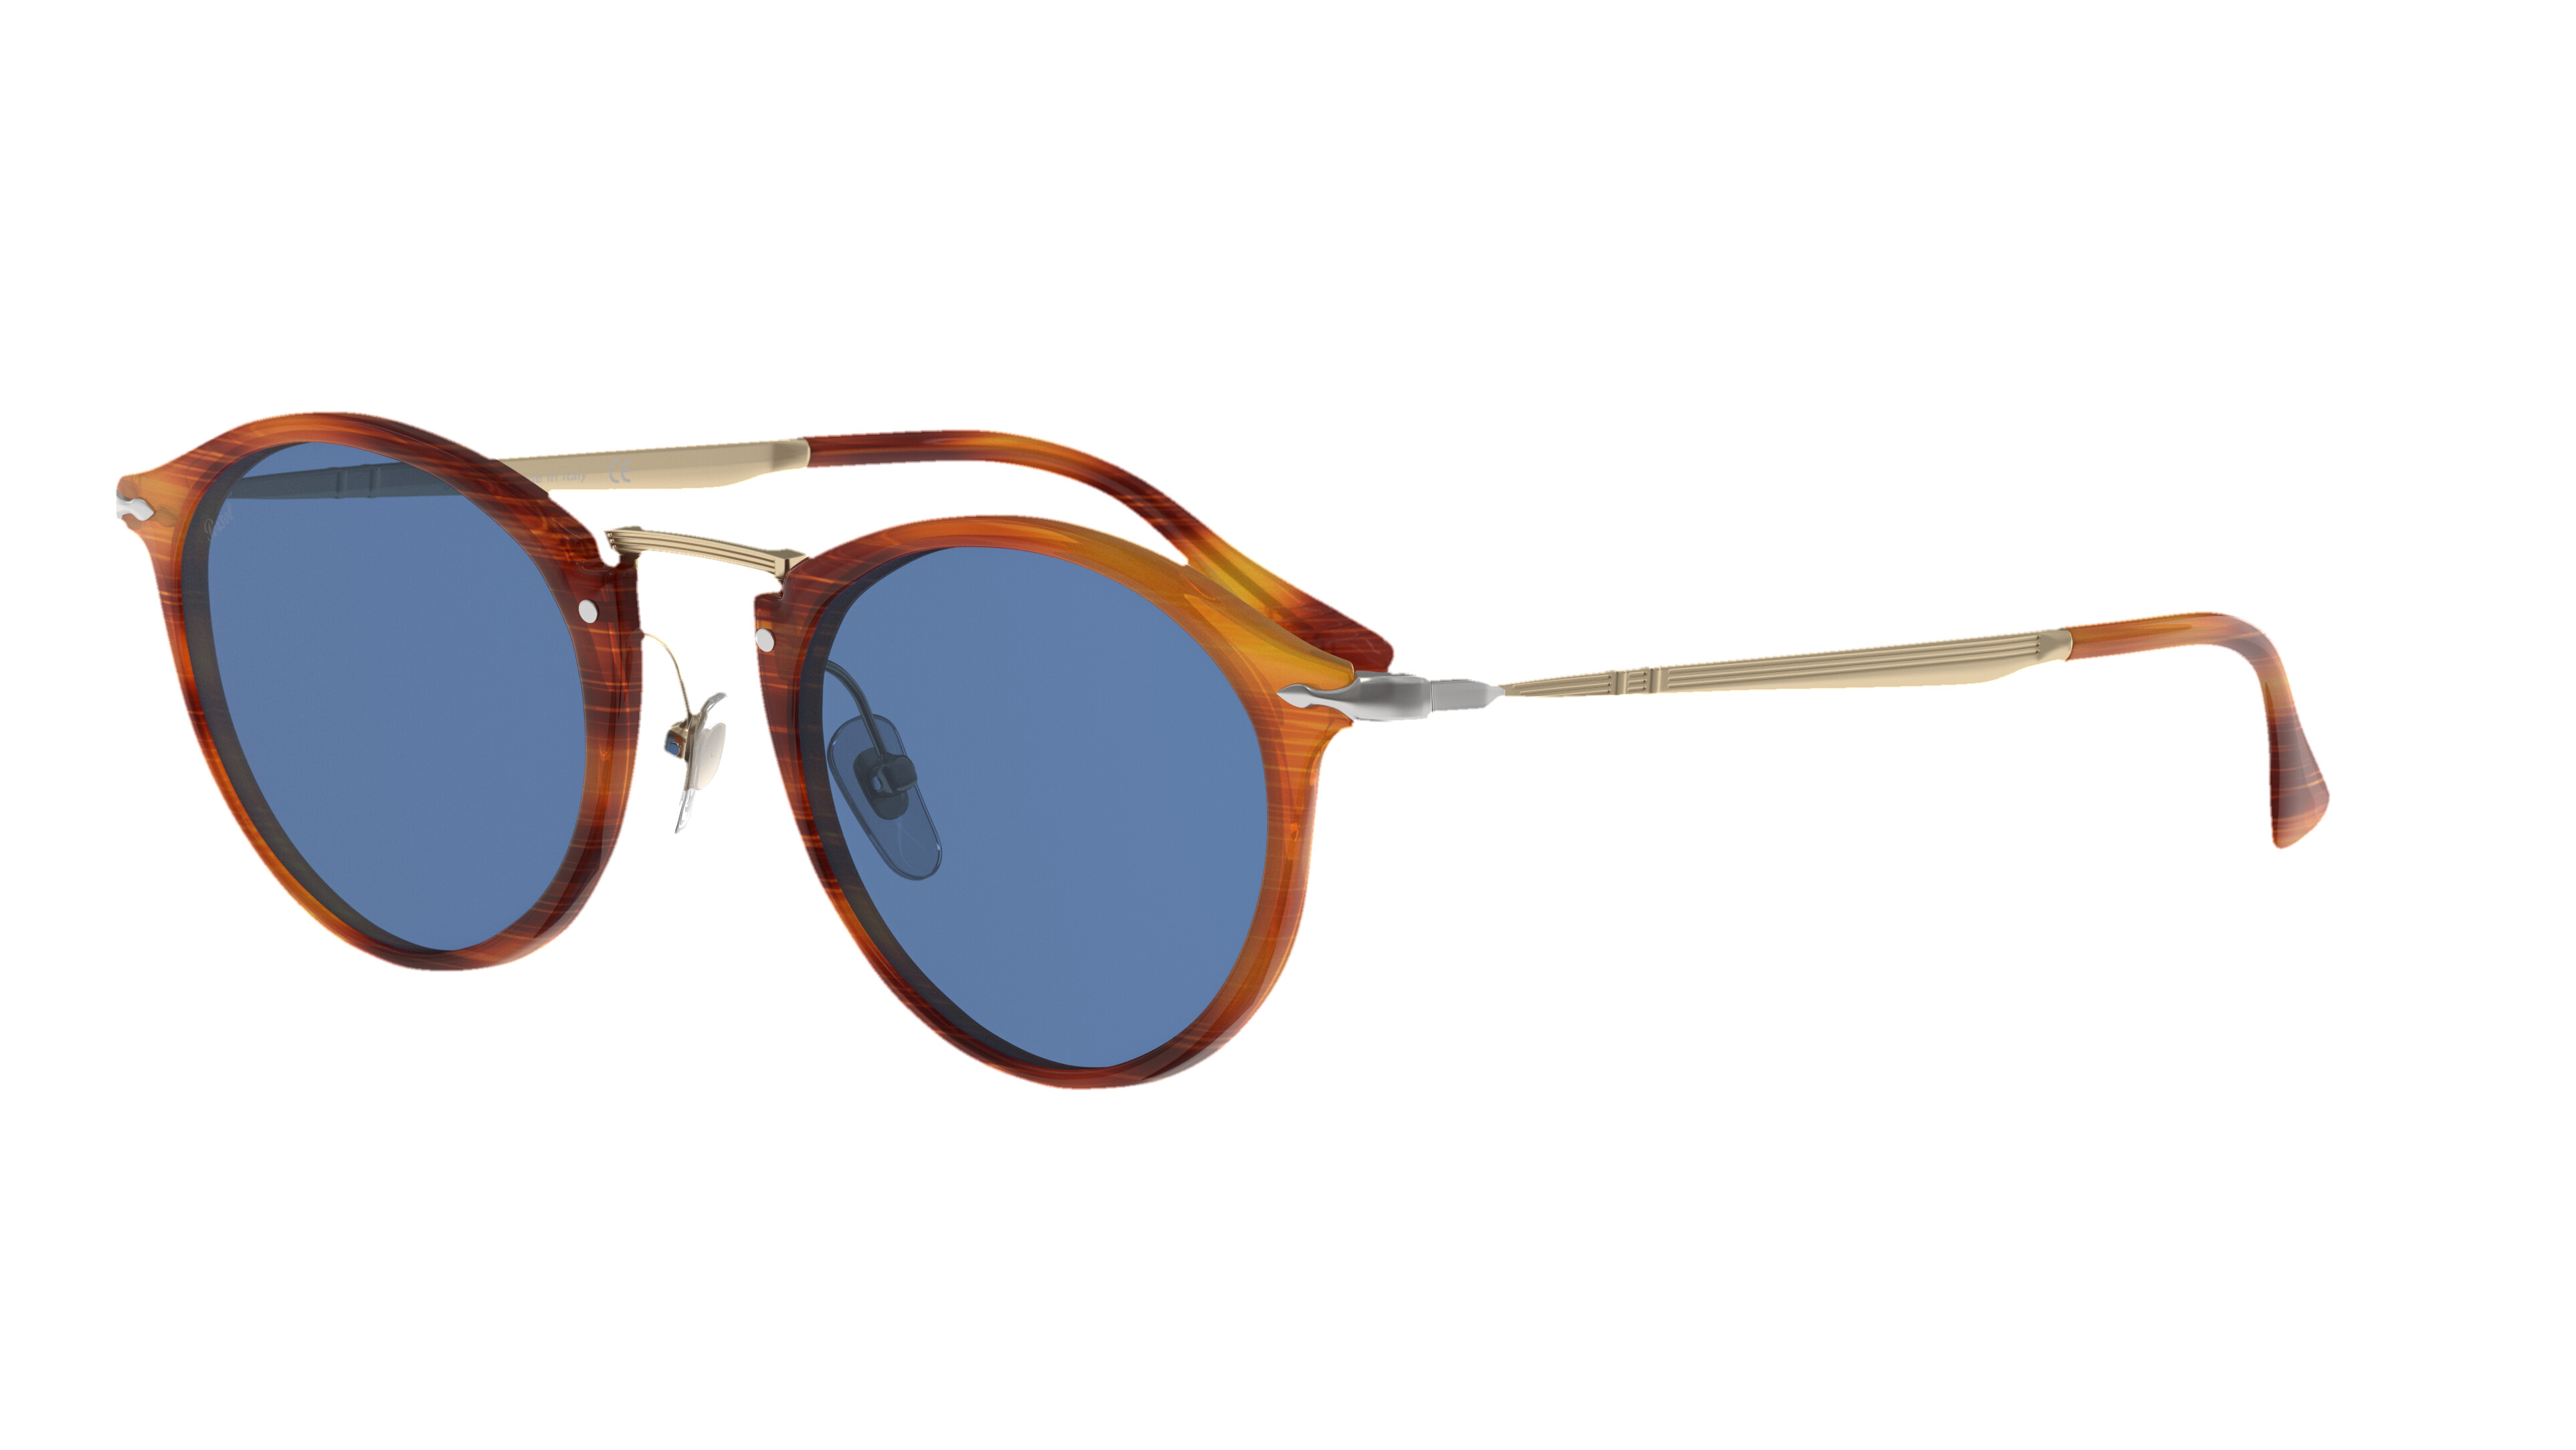 [products.image.angle_left01] Persol 0PO3166S 960/56 Sonnenbrille